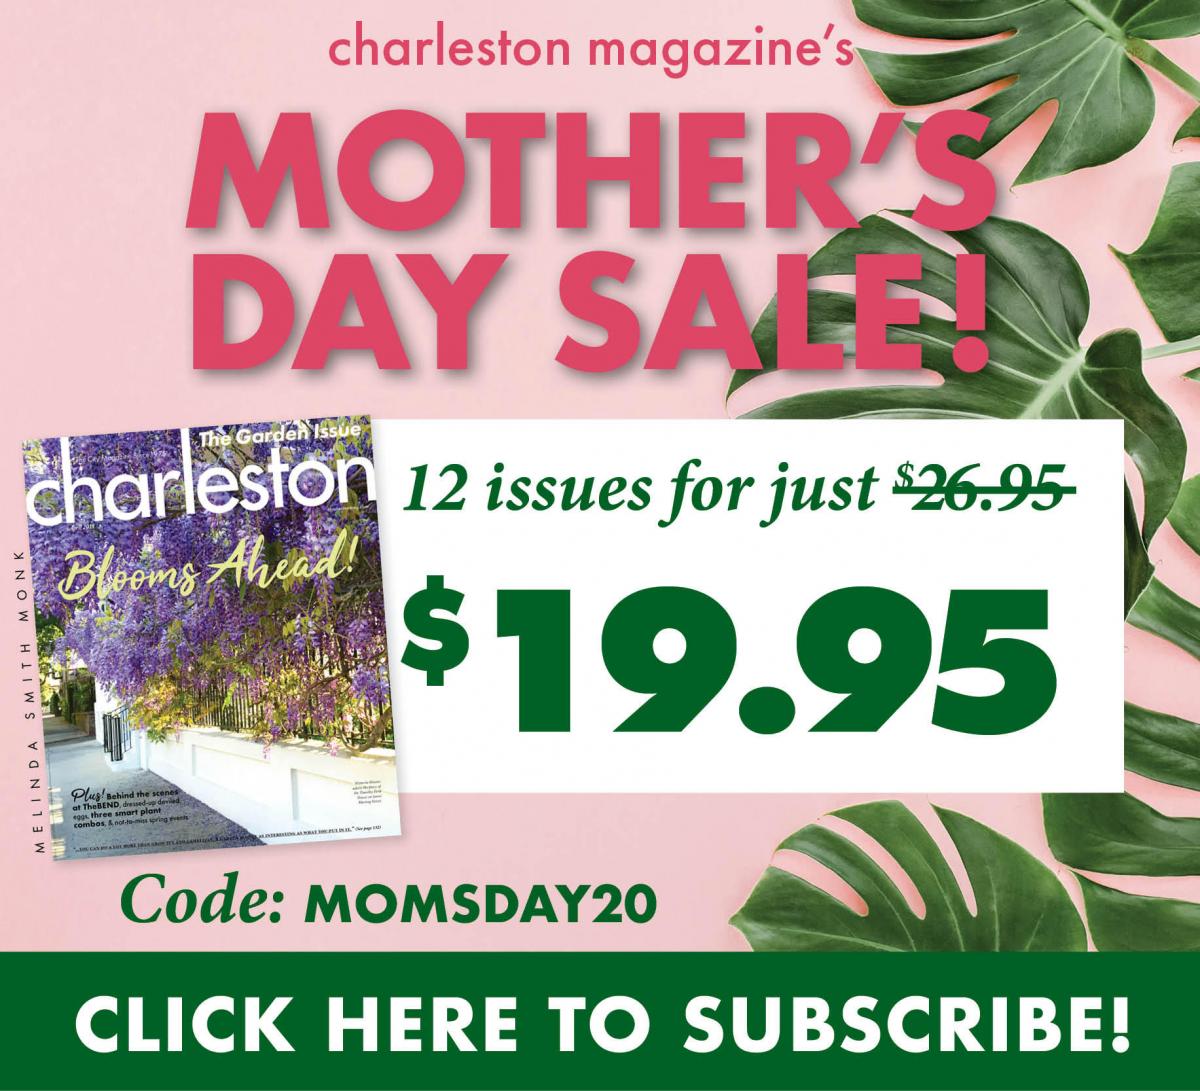 This is an ad for with a code for a Mother's Day discount on Charleston magazine.